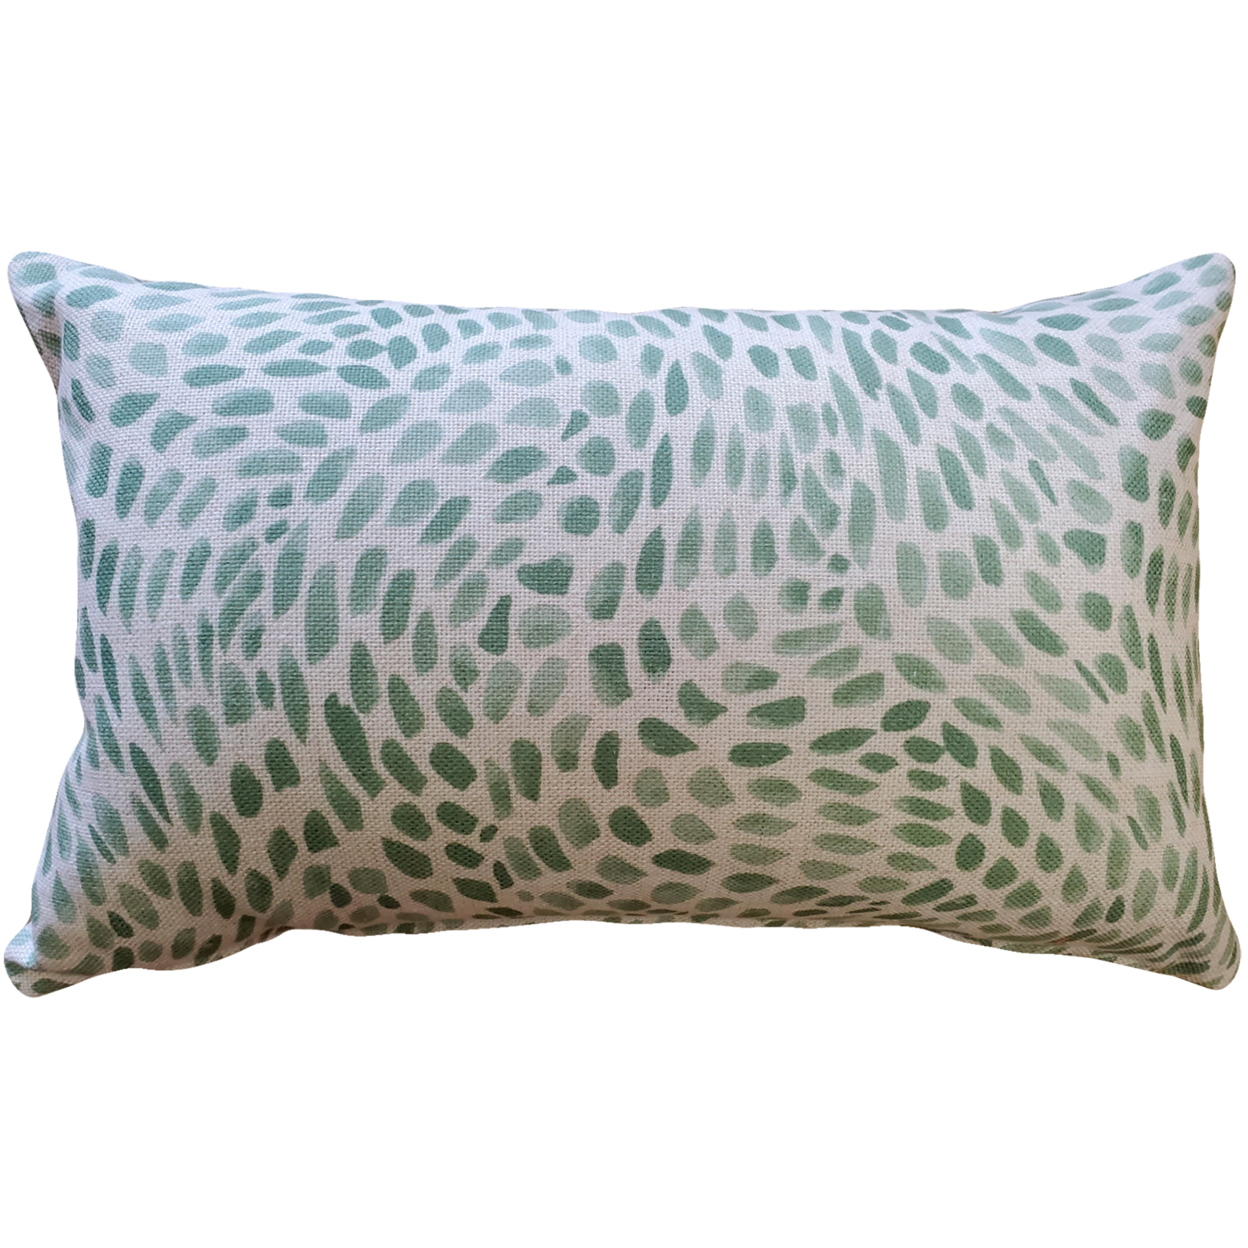 Matisse Dots Spring Green Throw Pillow 12x19 Inches Square, Complete Pillow With Polyfill Pillow Insert